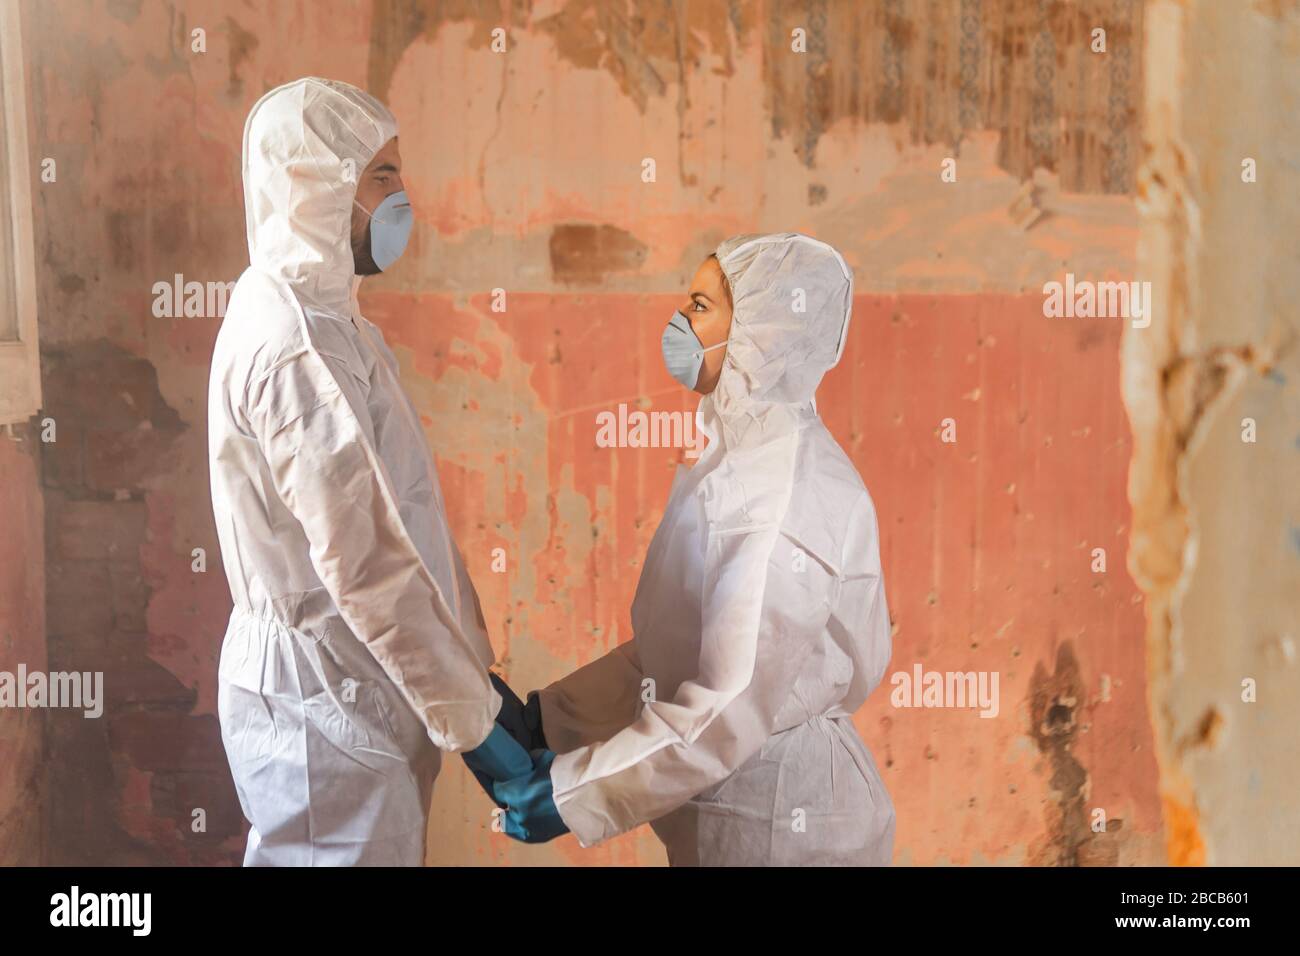 Couple of virologist doctors and scientists wearing biohazard protective suits and holding hands full of hope after a nuclear core meltdown disaster Stock Photo